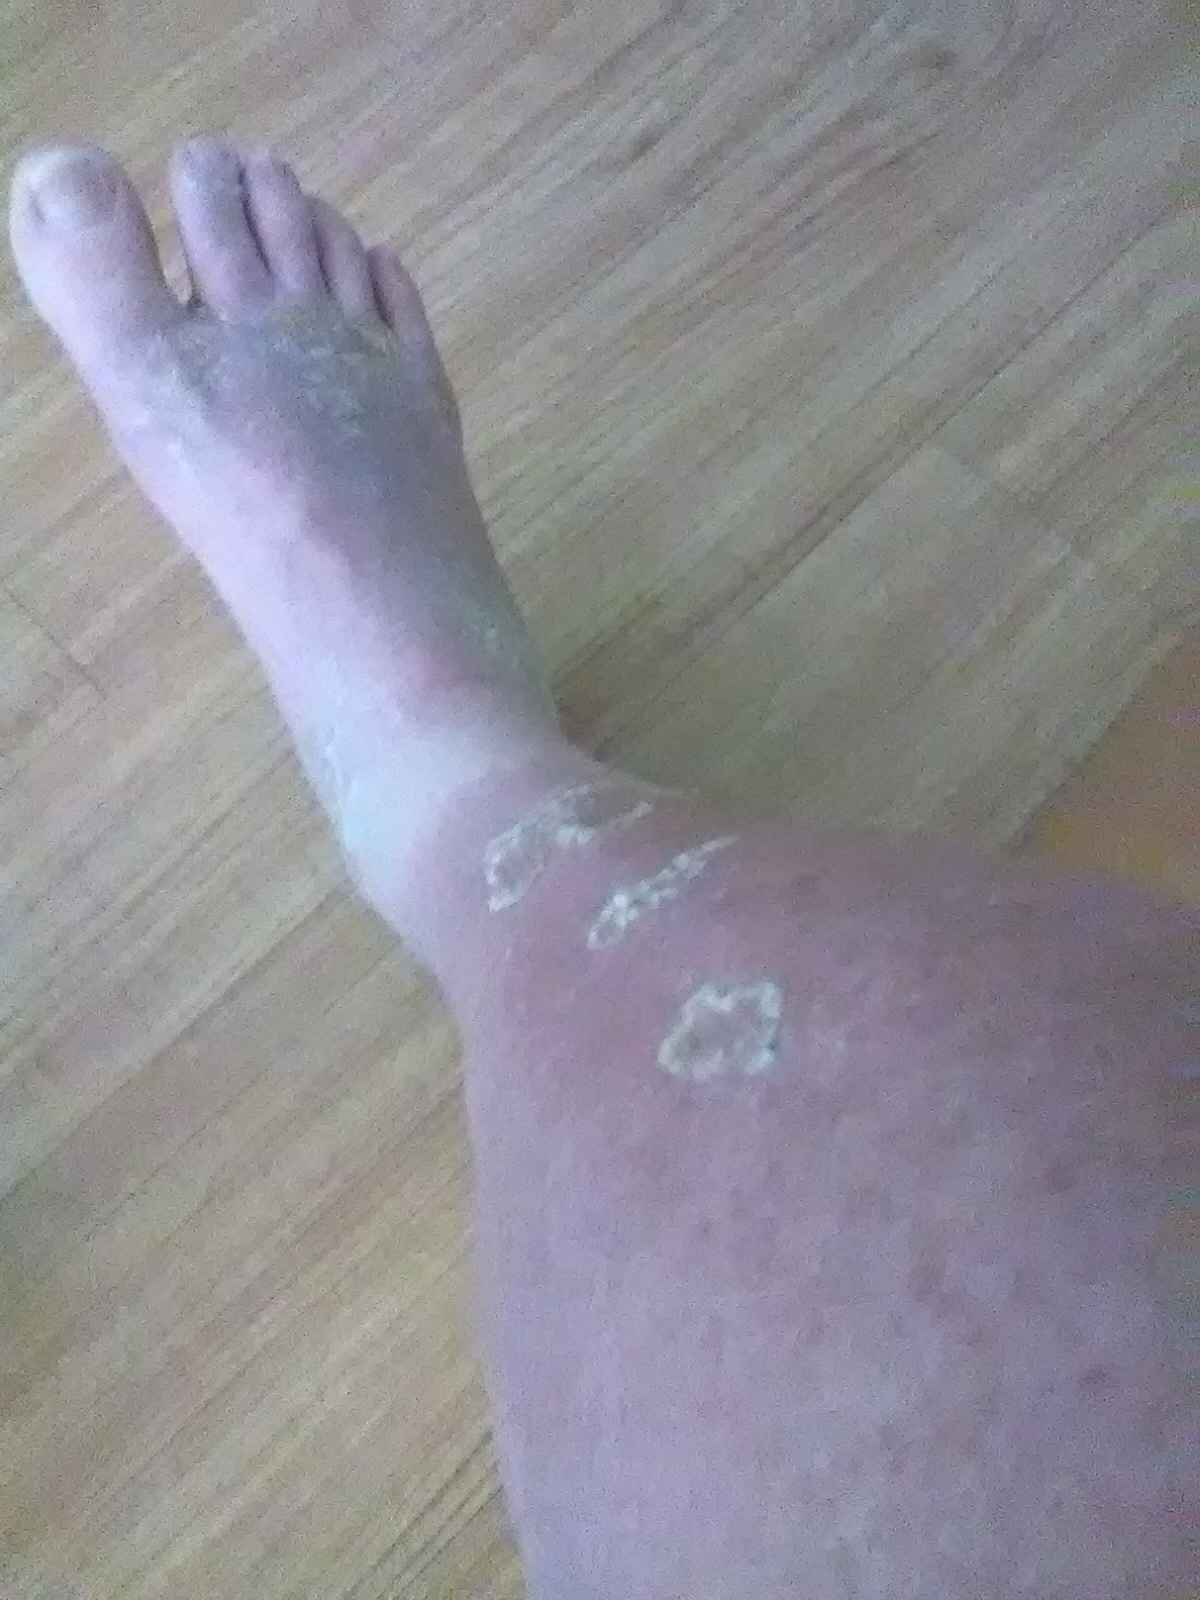 Chemical Burns From Ingested Poison On My Legs